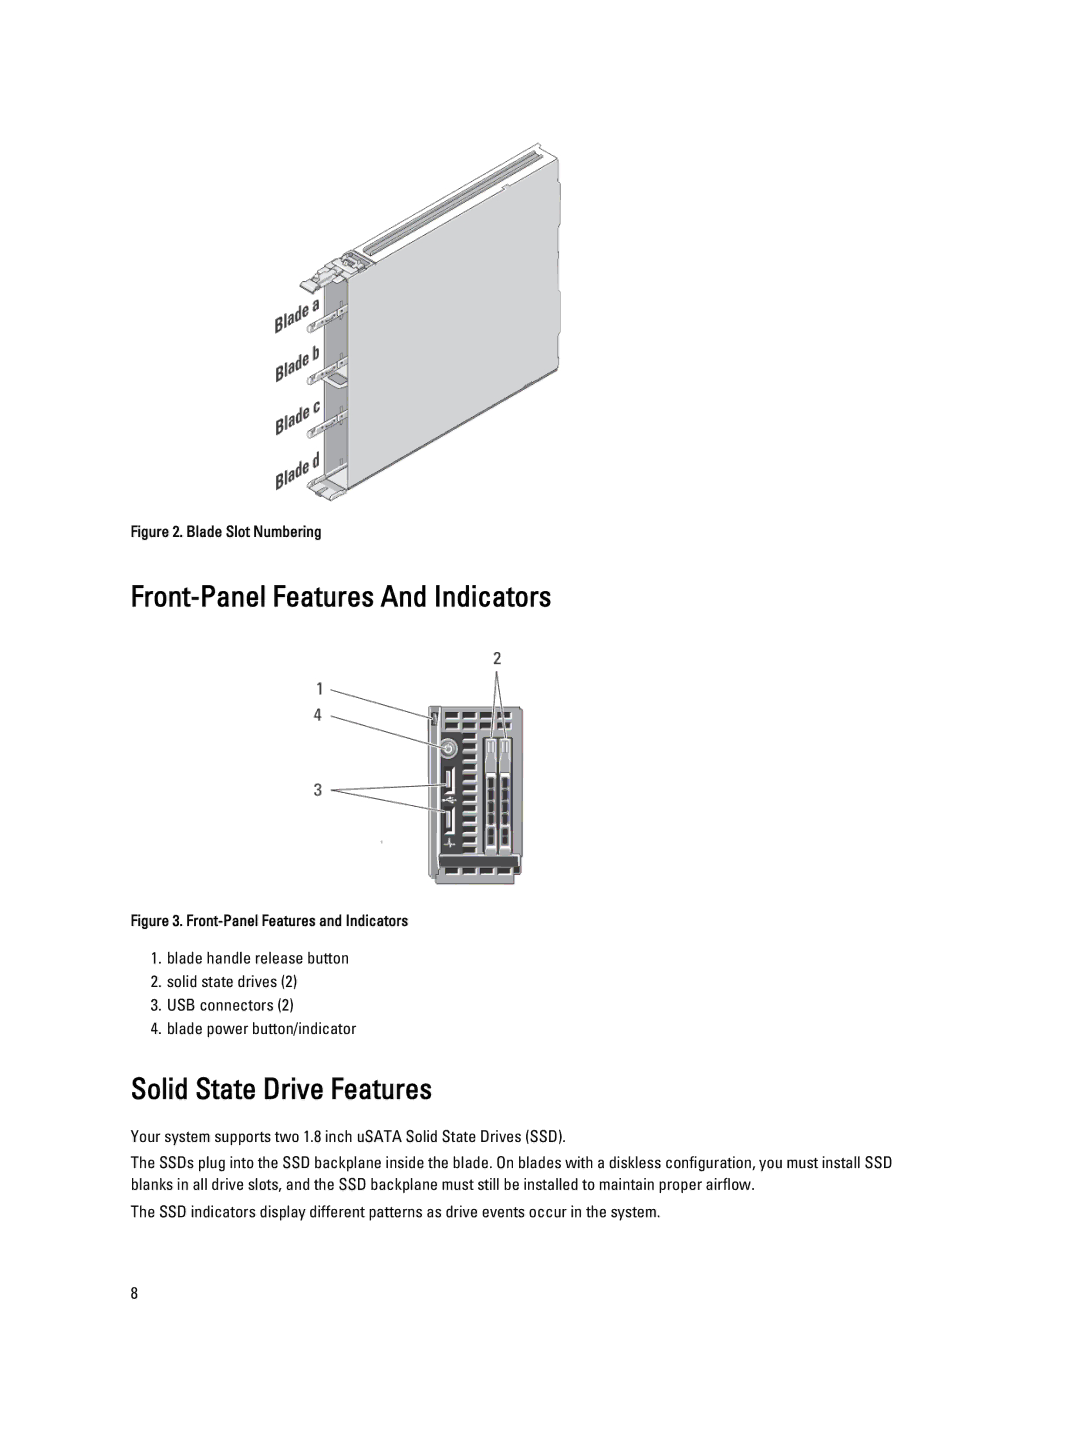 Dell QHB owner manual Front-Panel Features And Indicators, Solid State Drive Features 